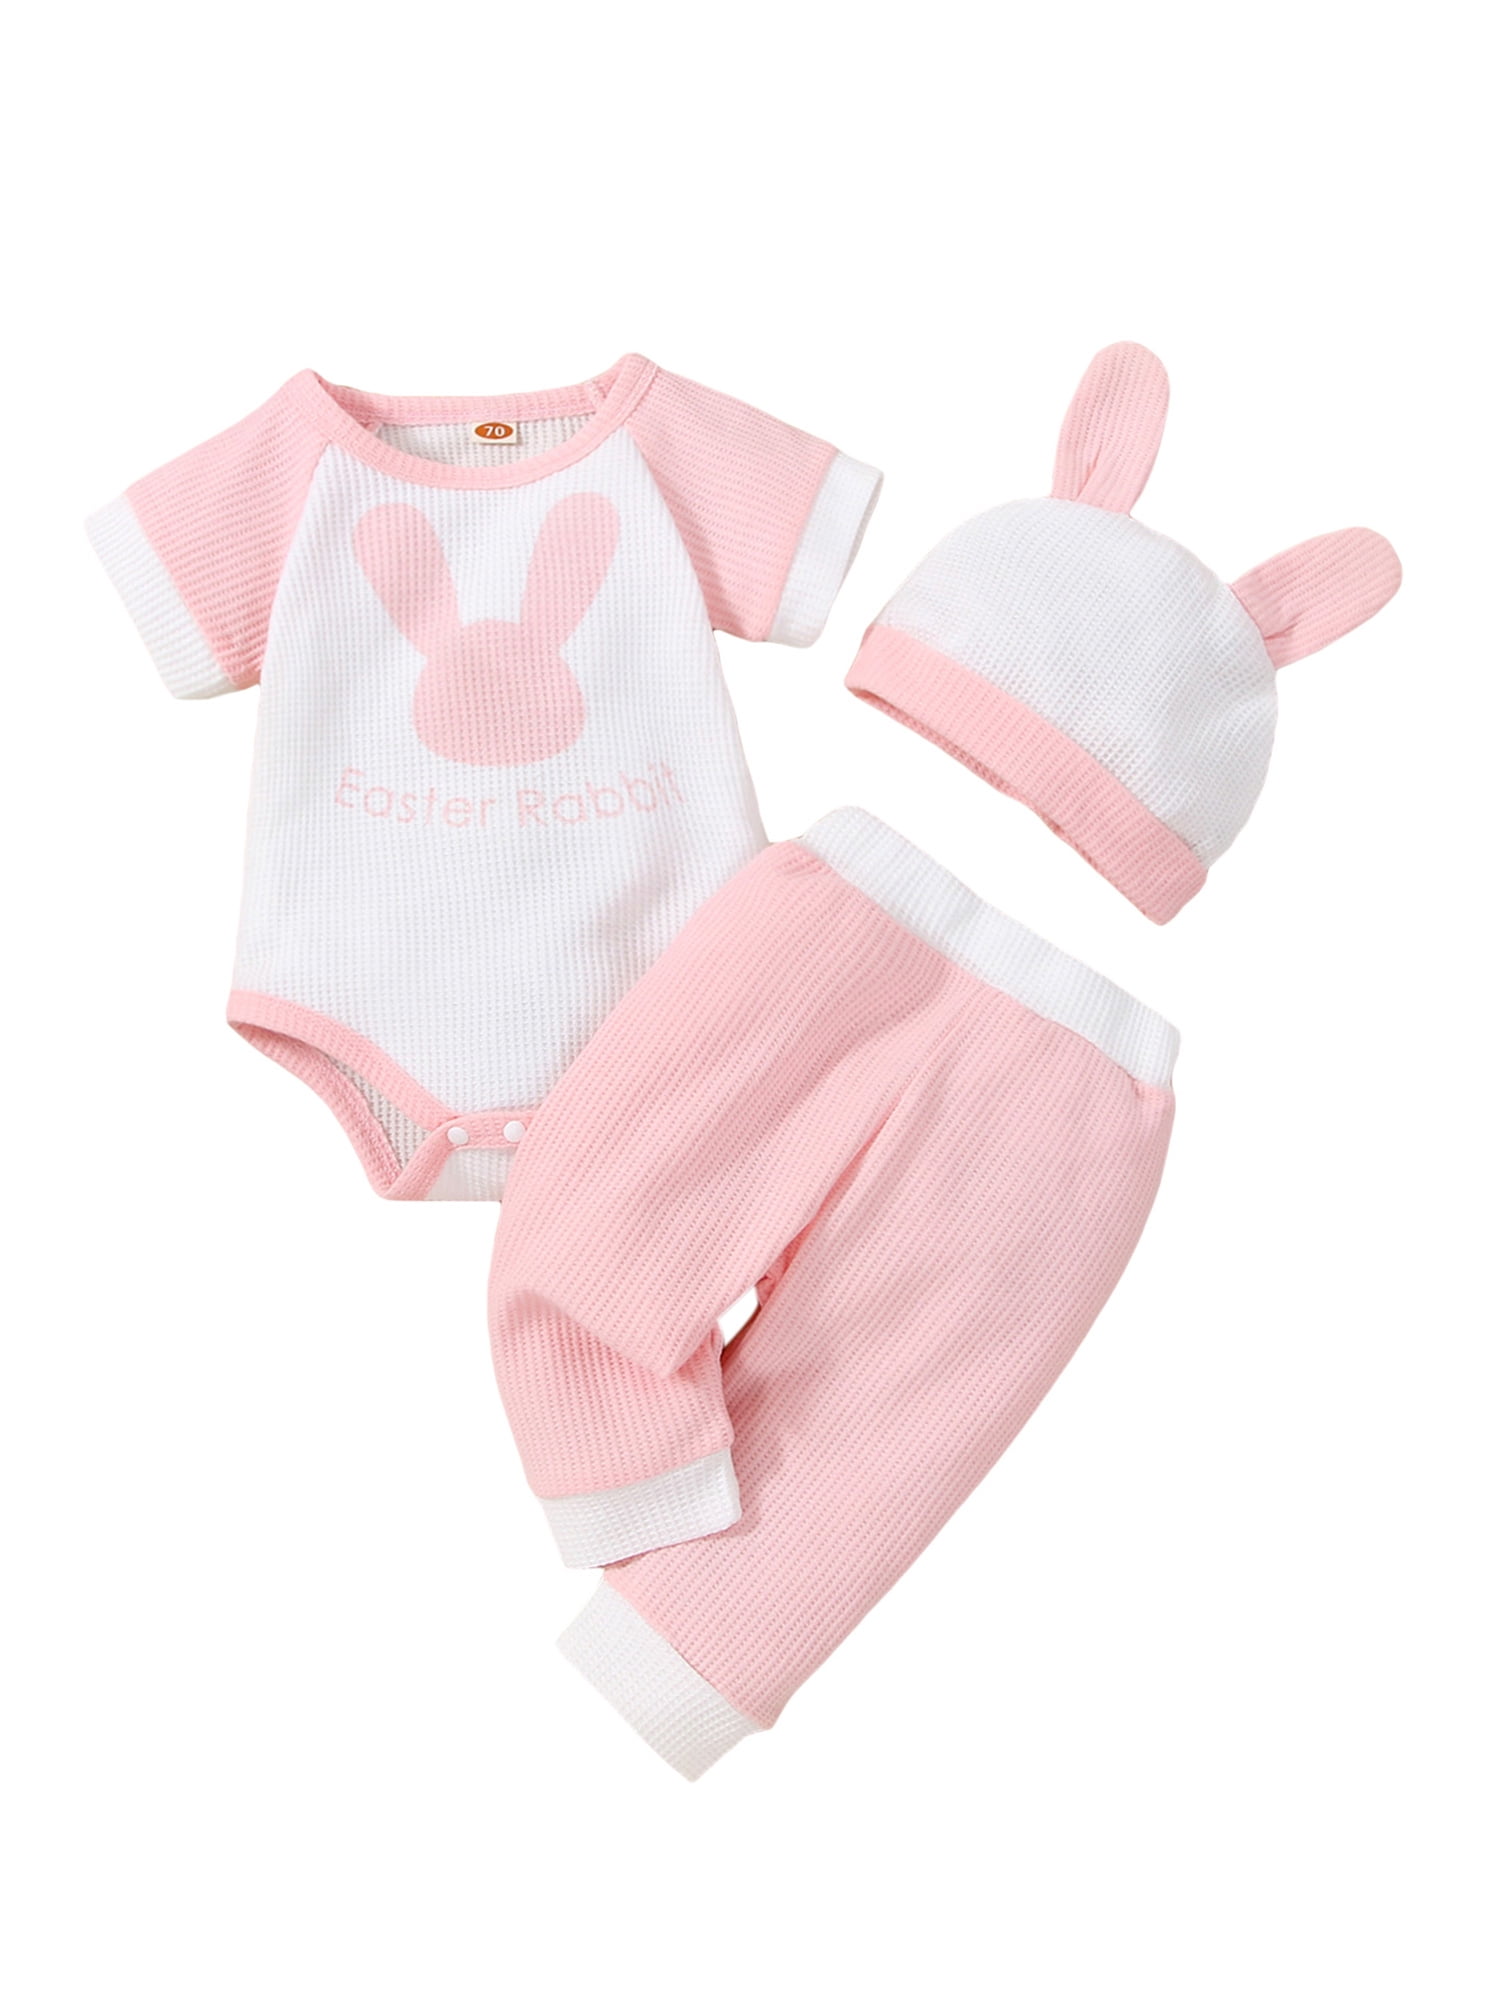 baskuwish 3Pcs/Set My 1st Easter 2019 Outfit Baby Boys Girls Easter Bunny Creeper Romper Pants Hat Easter Outfit